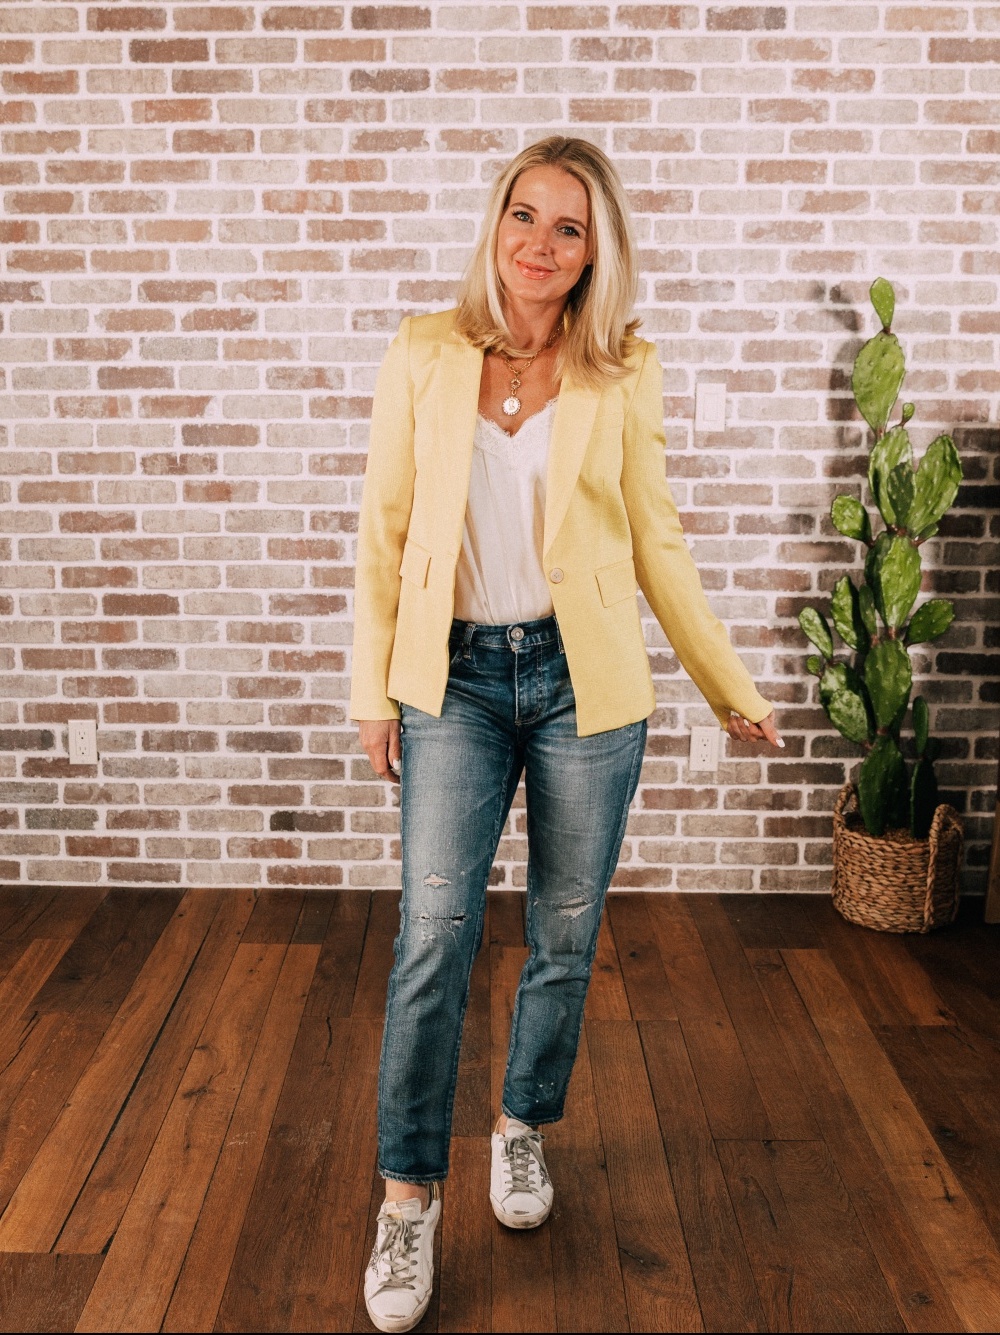 Stylish Work From Home Outfits, Fashion blogger Erin Busbee of BusbeeStyle.com wearing a yellow blazer by Veronica Beard with white cami, Moussy Vintage jeans, and golden goose sneakers in Telluride, Colorado